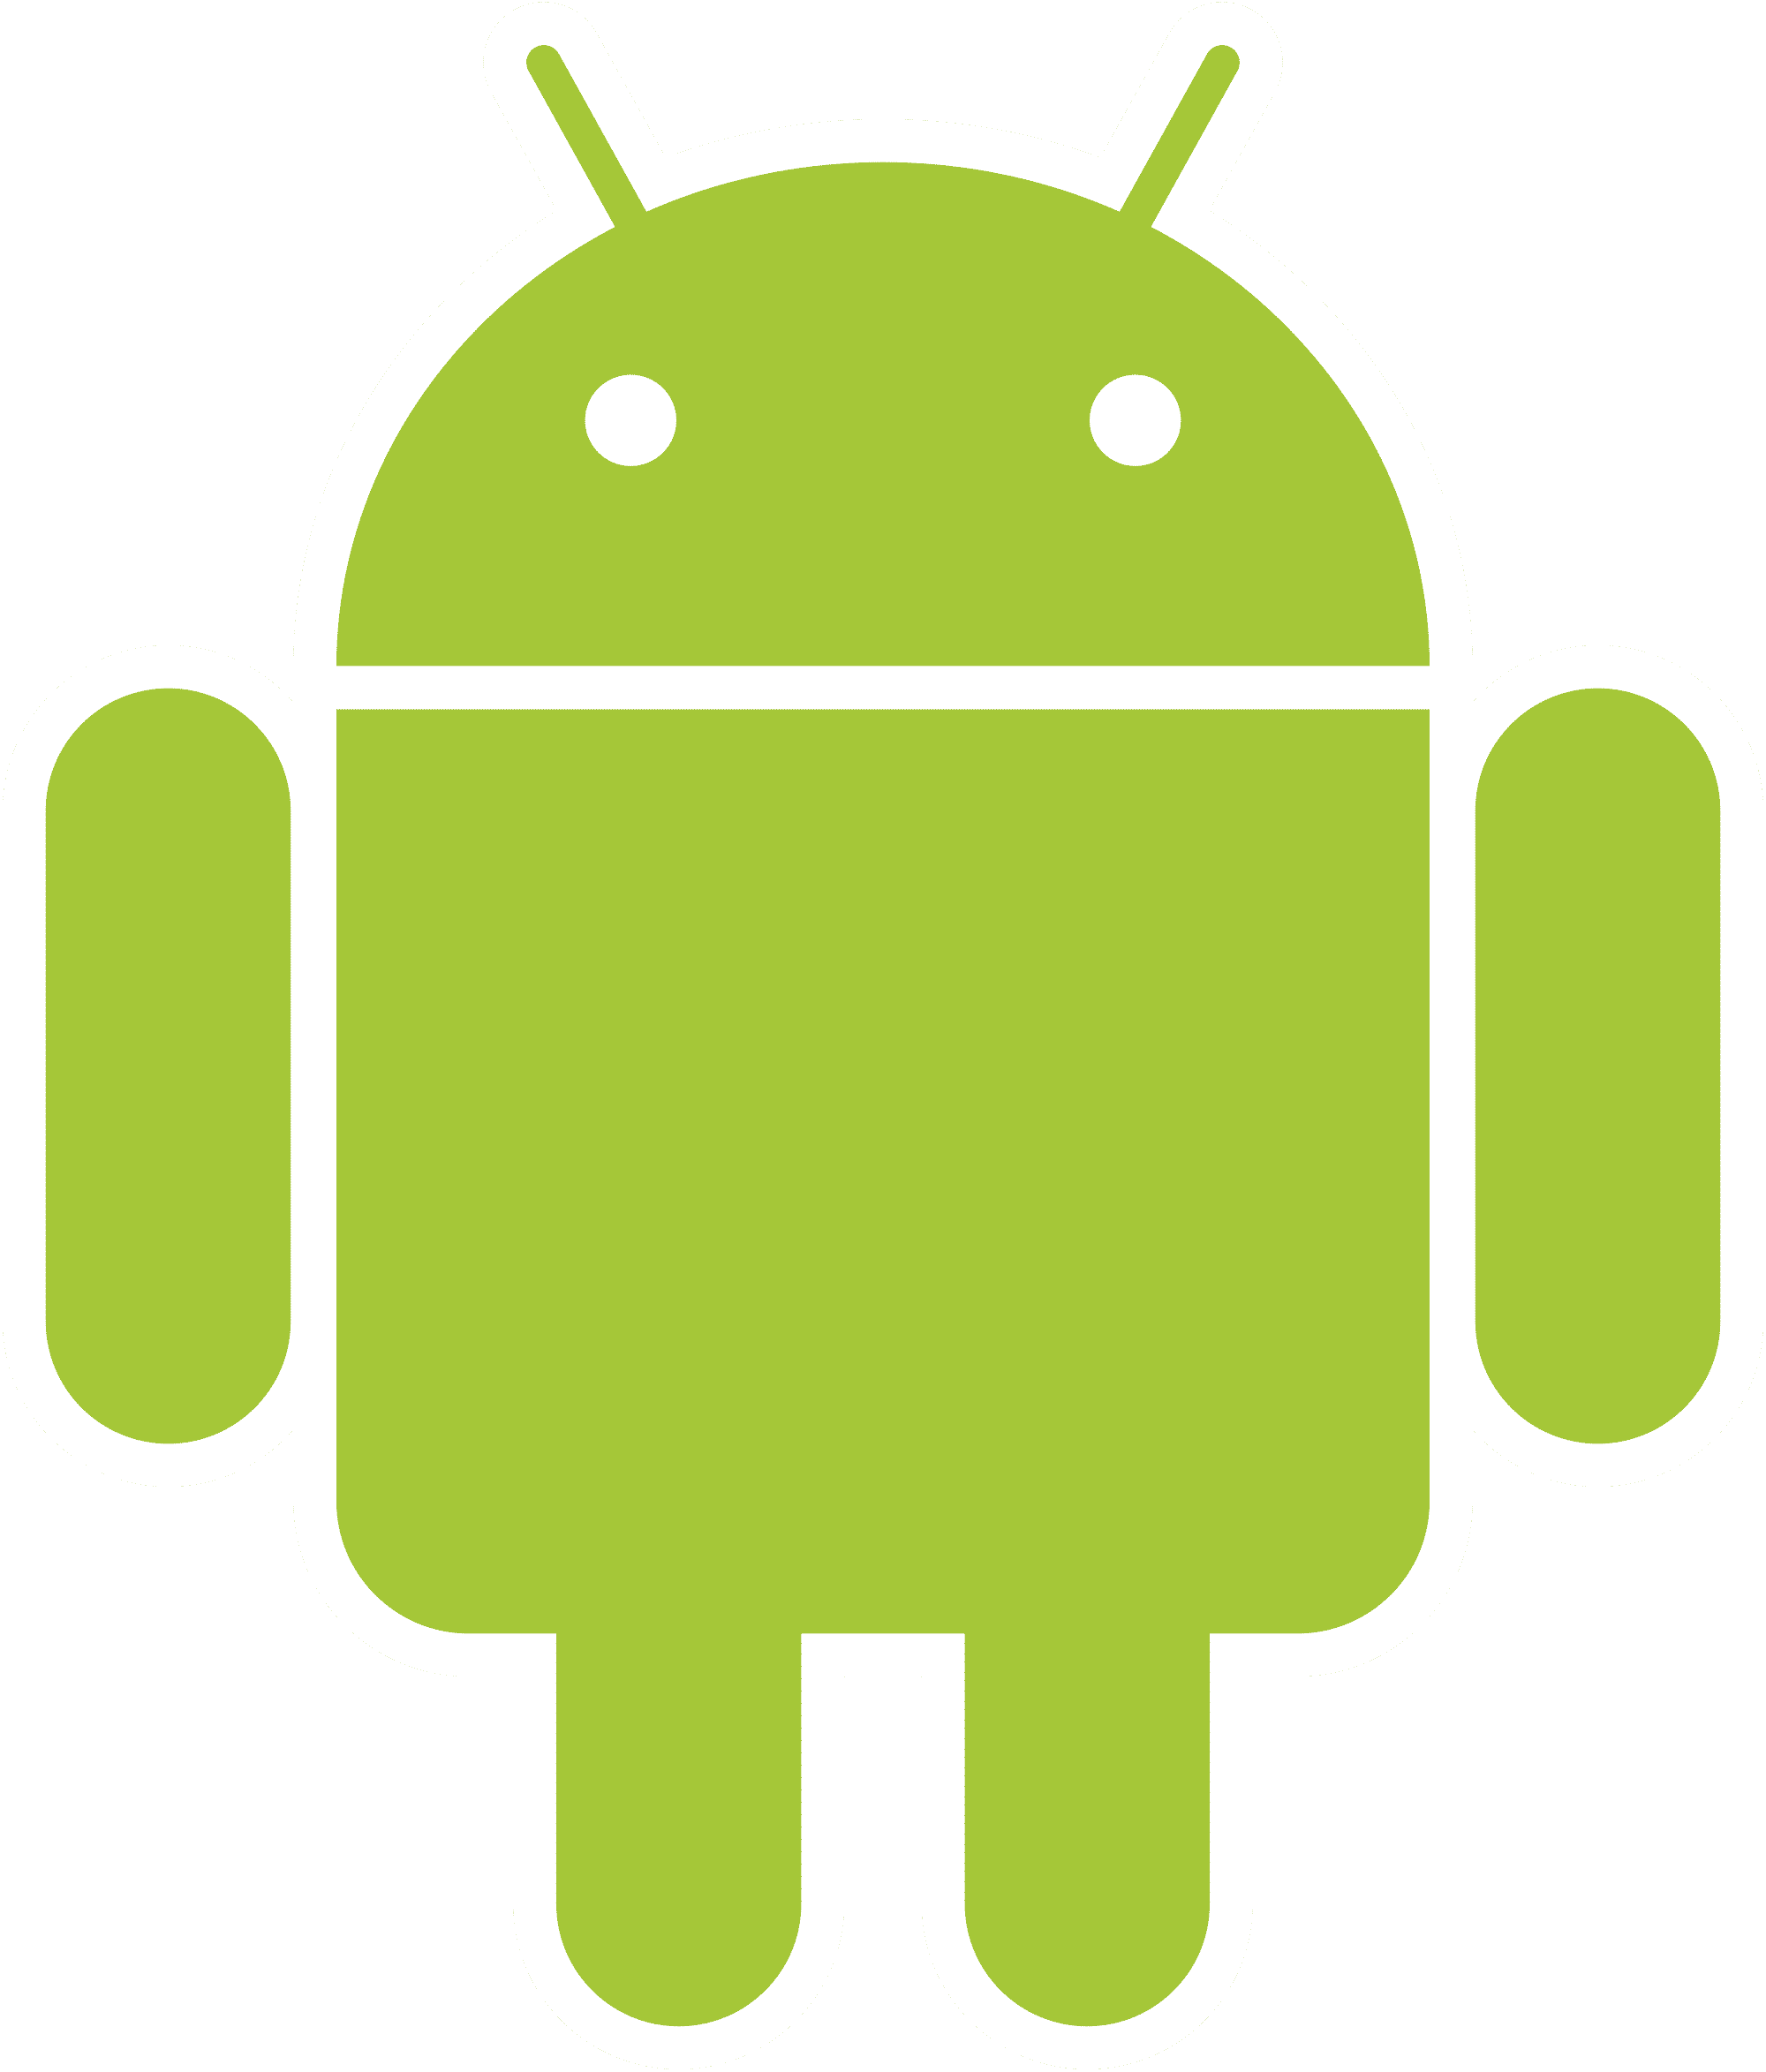 Android is a cellular operating system that Google developed and it was unveiled under its umbrella in 2007.